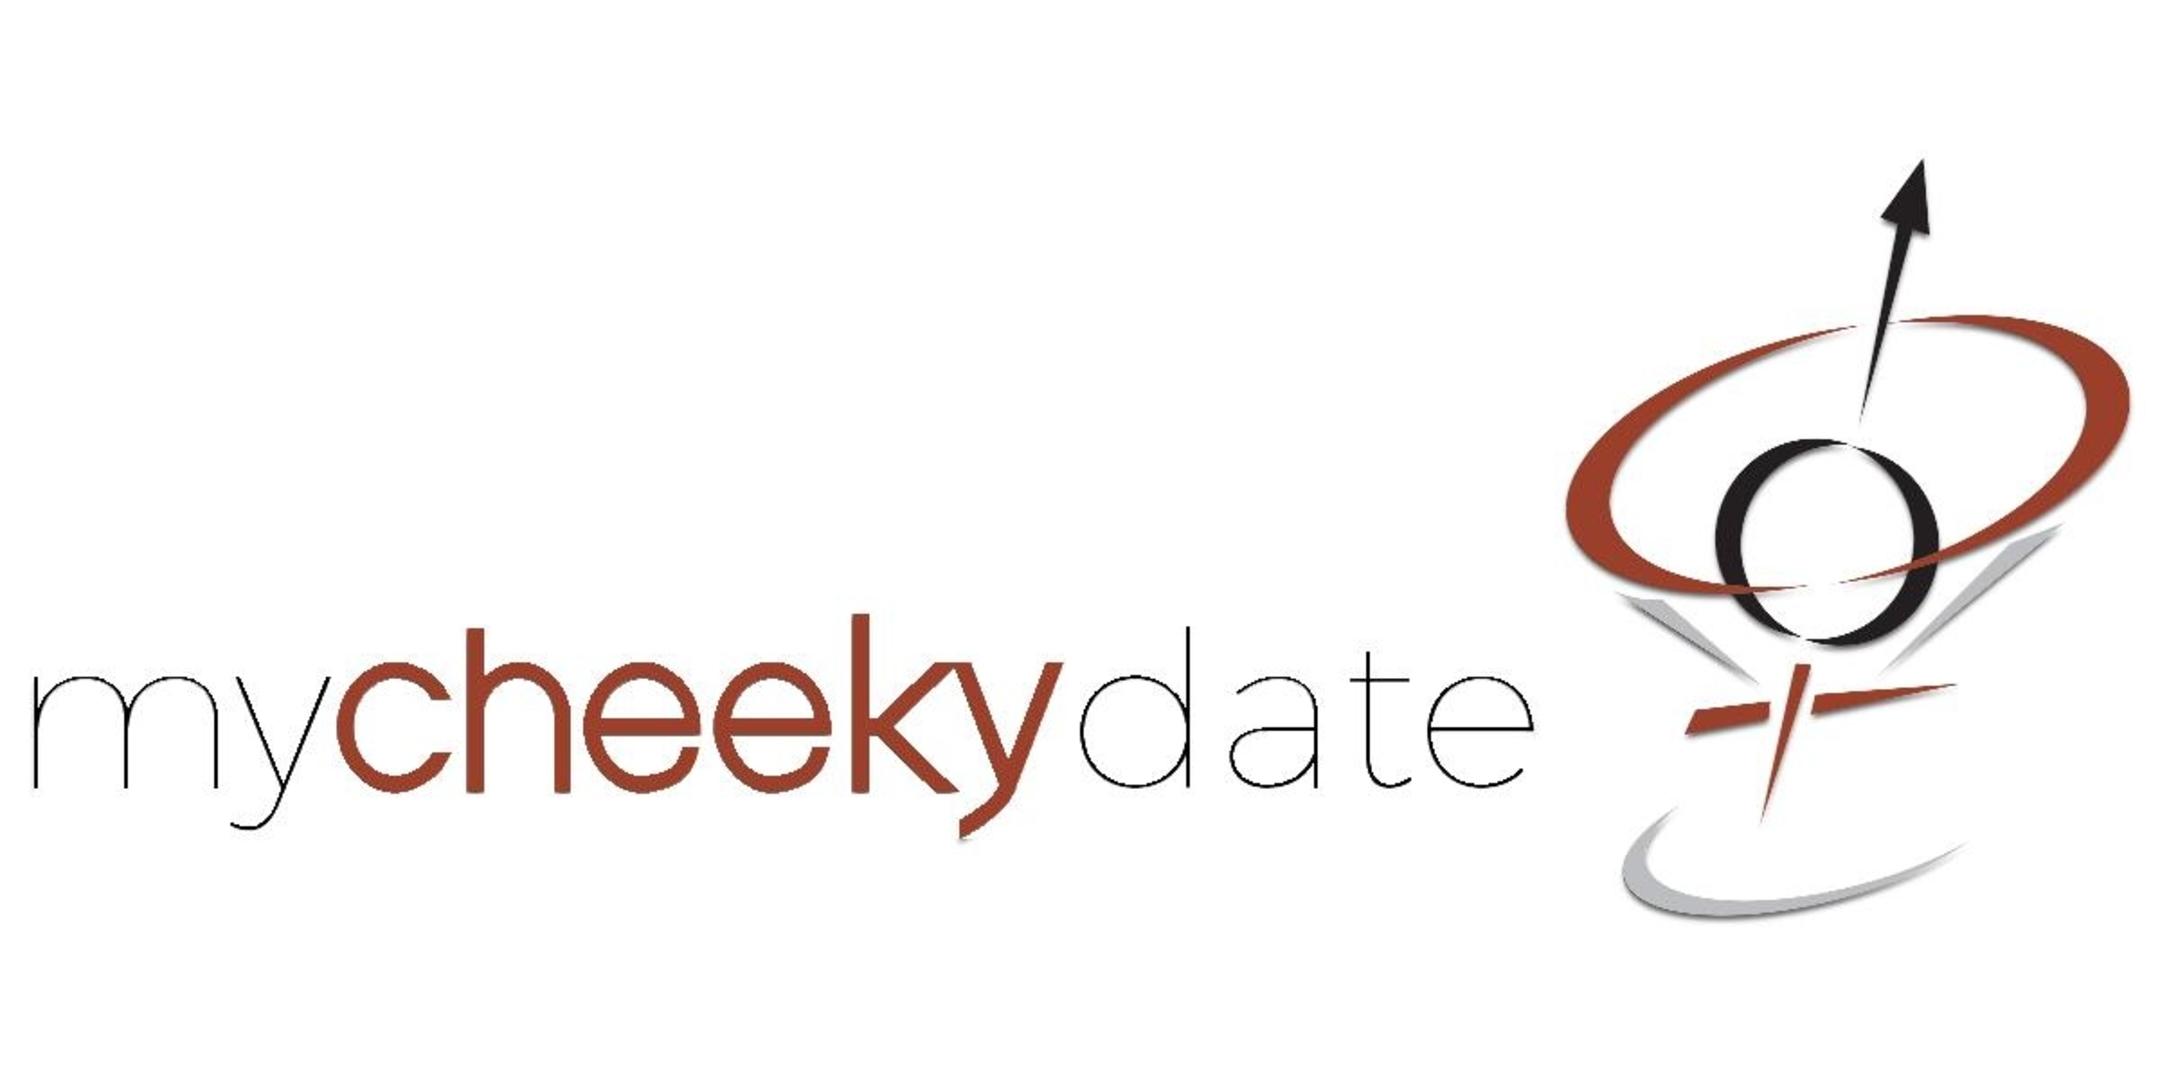 Speed Dating (Ages 24-36) | SF Singles Event Saturday | Let's Get Cheeky!